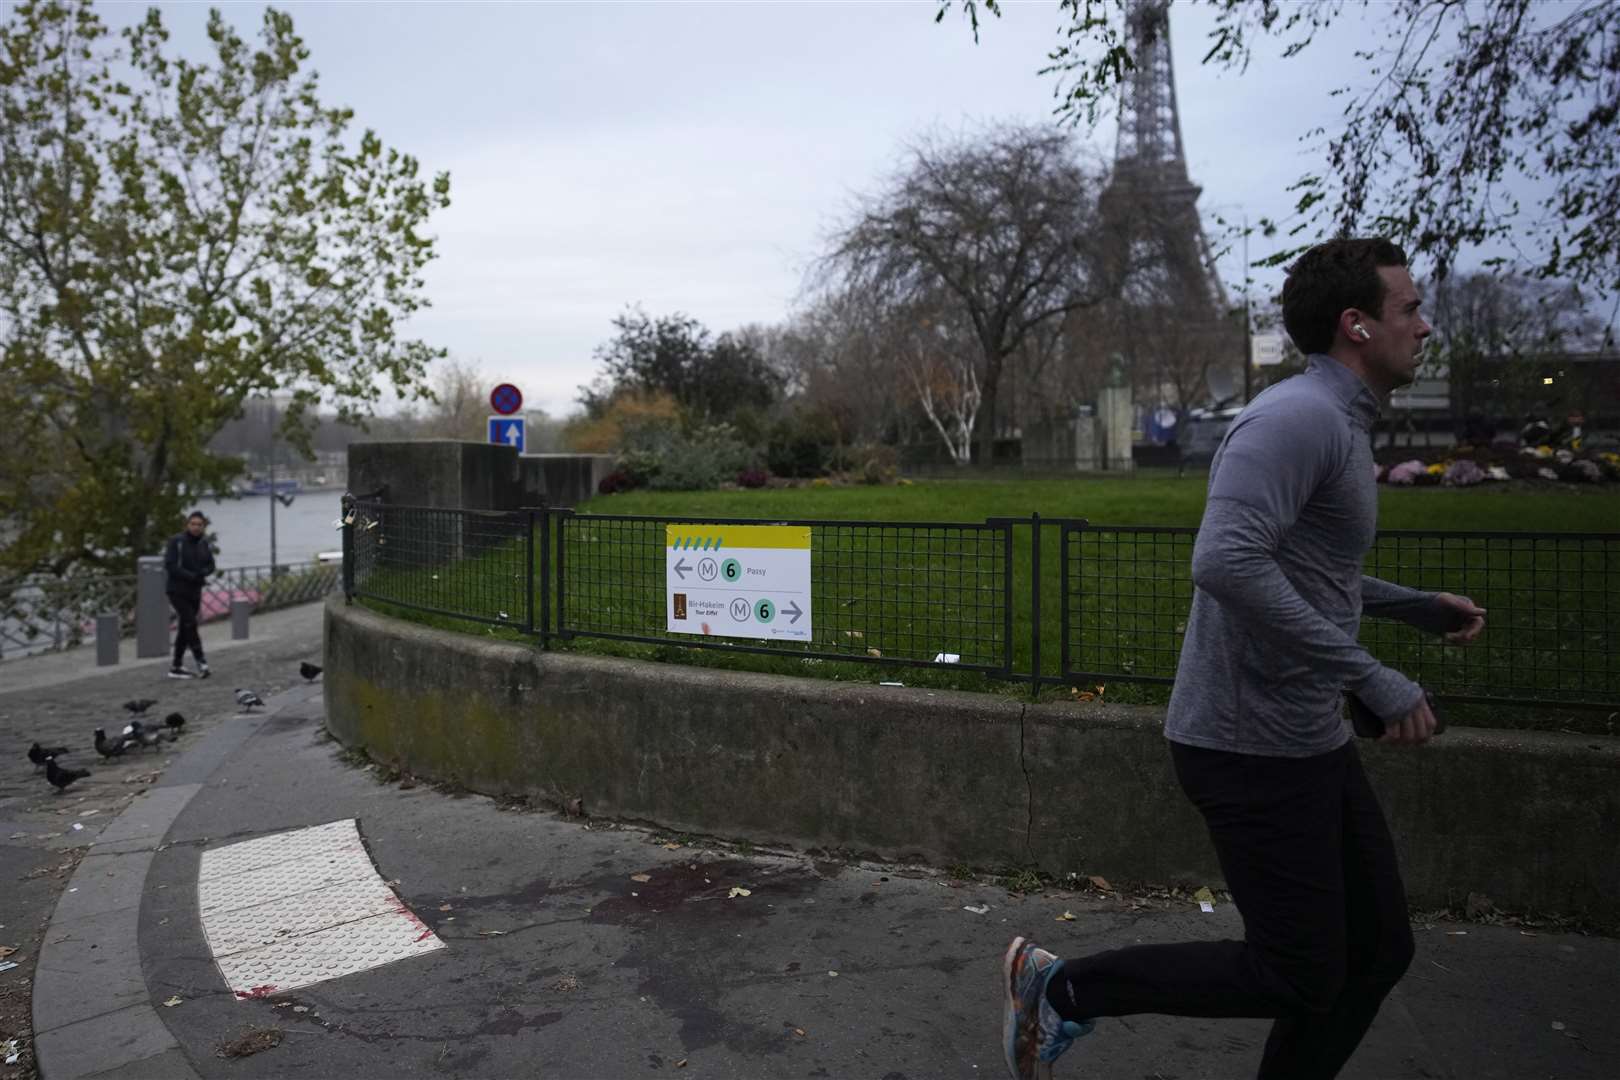 A man jogs past a blood stain at the site where a man targeted passers-by (Christophe Ena/AP)